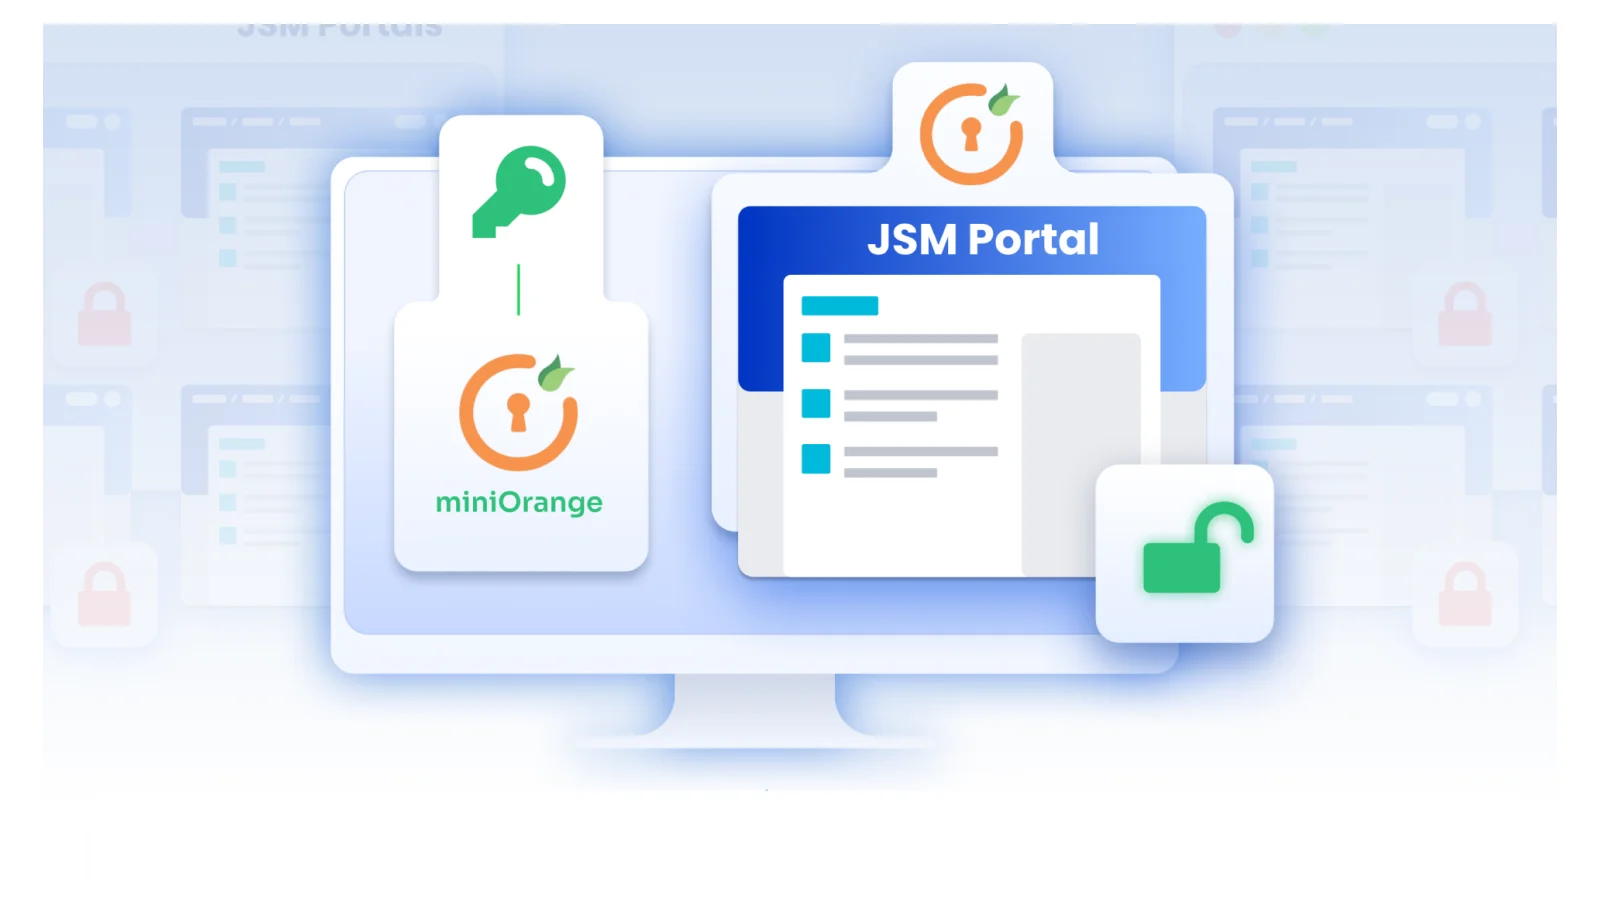 elevating-itsm-with-jira-service-management